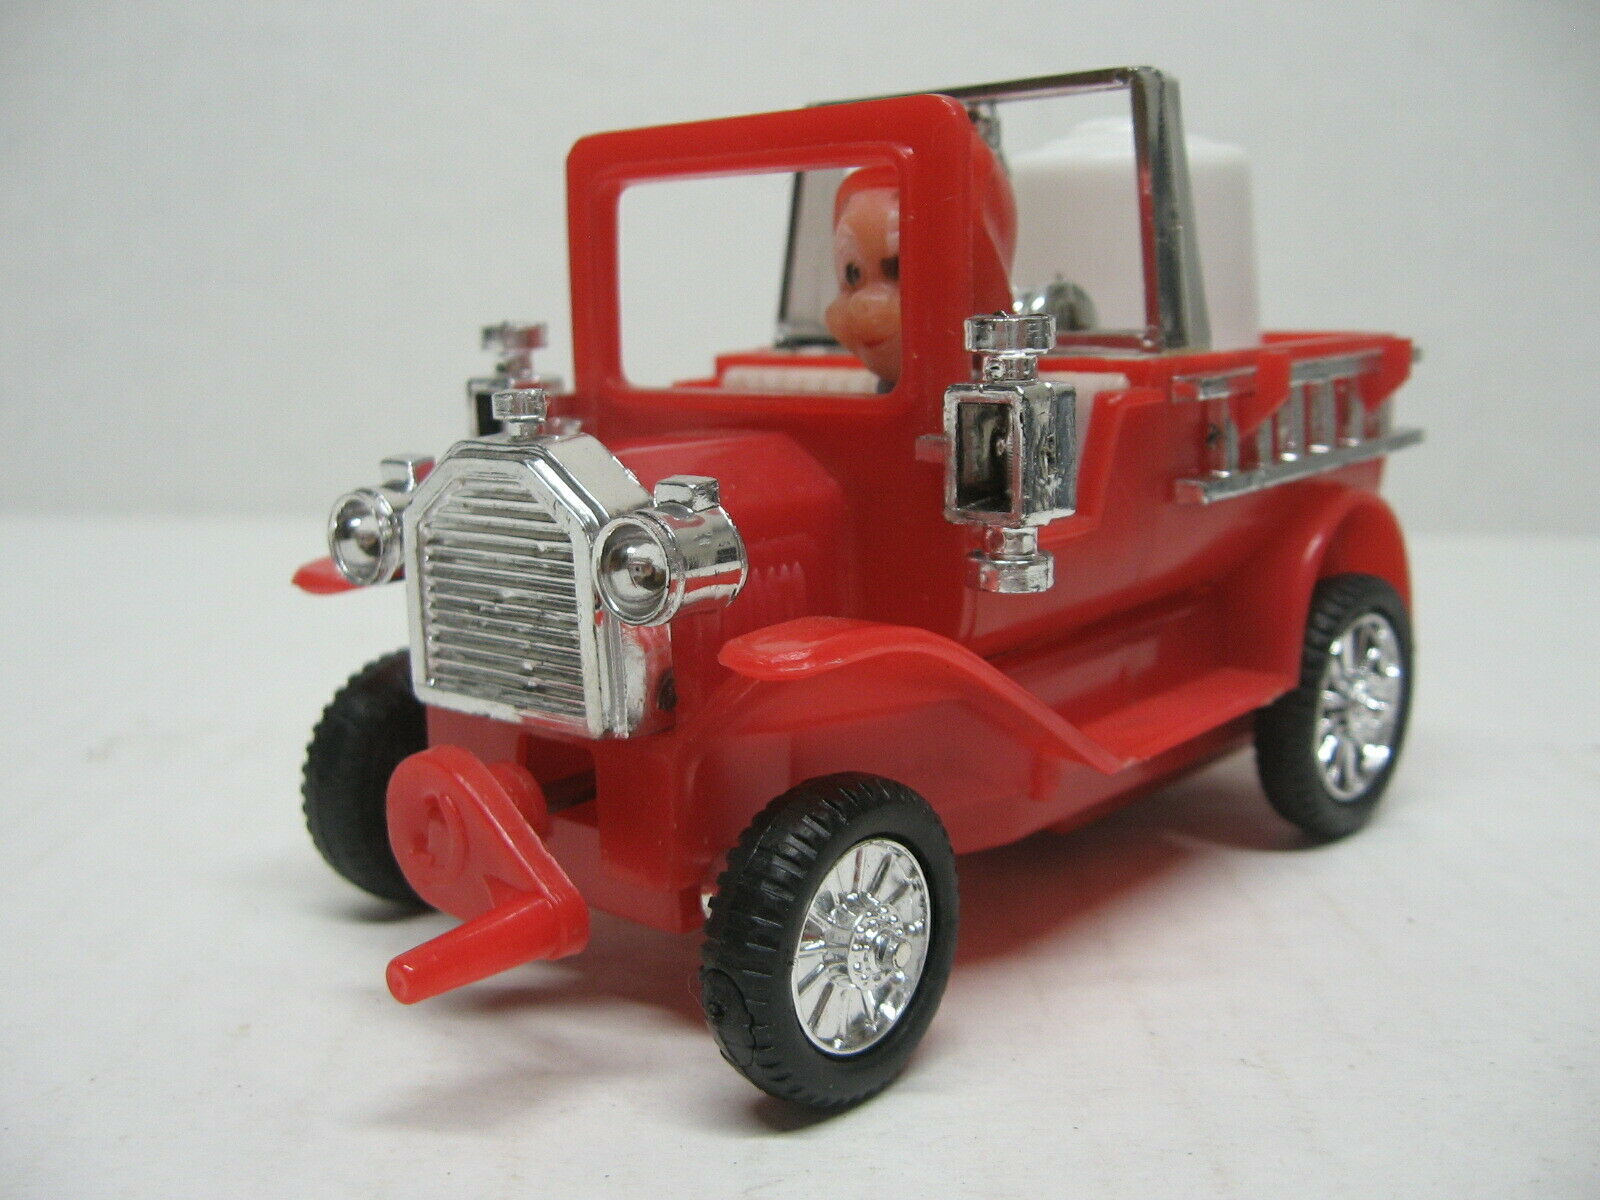 Unbranded Red Plastic Friction Toy Fire Truck With Driver - Wacky Front Wheels